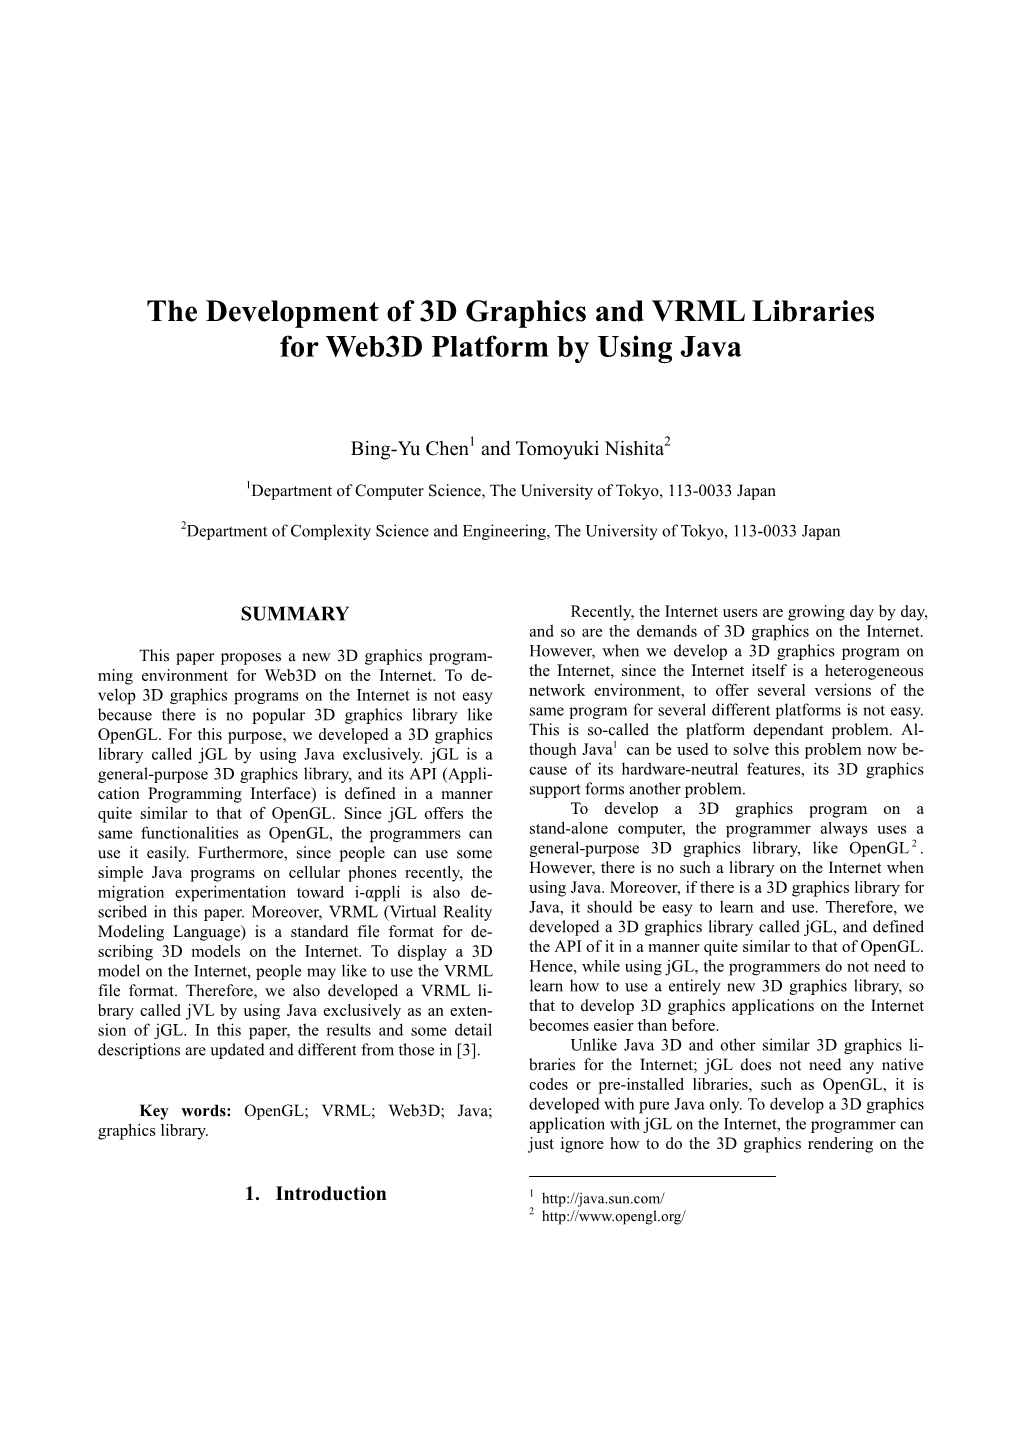 The Development of 3D Graphics and VRML Libraries for Web3d Platform by Using Java